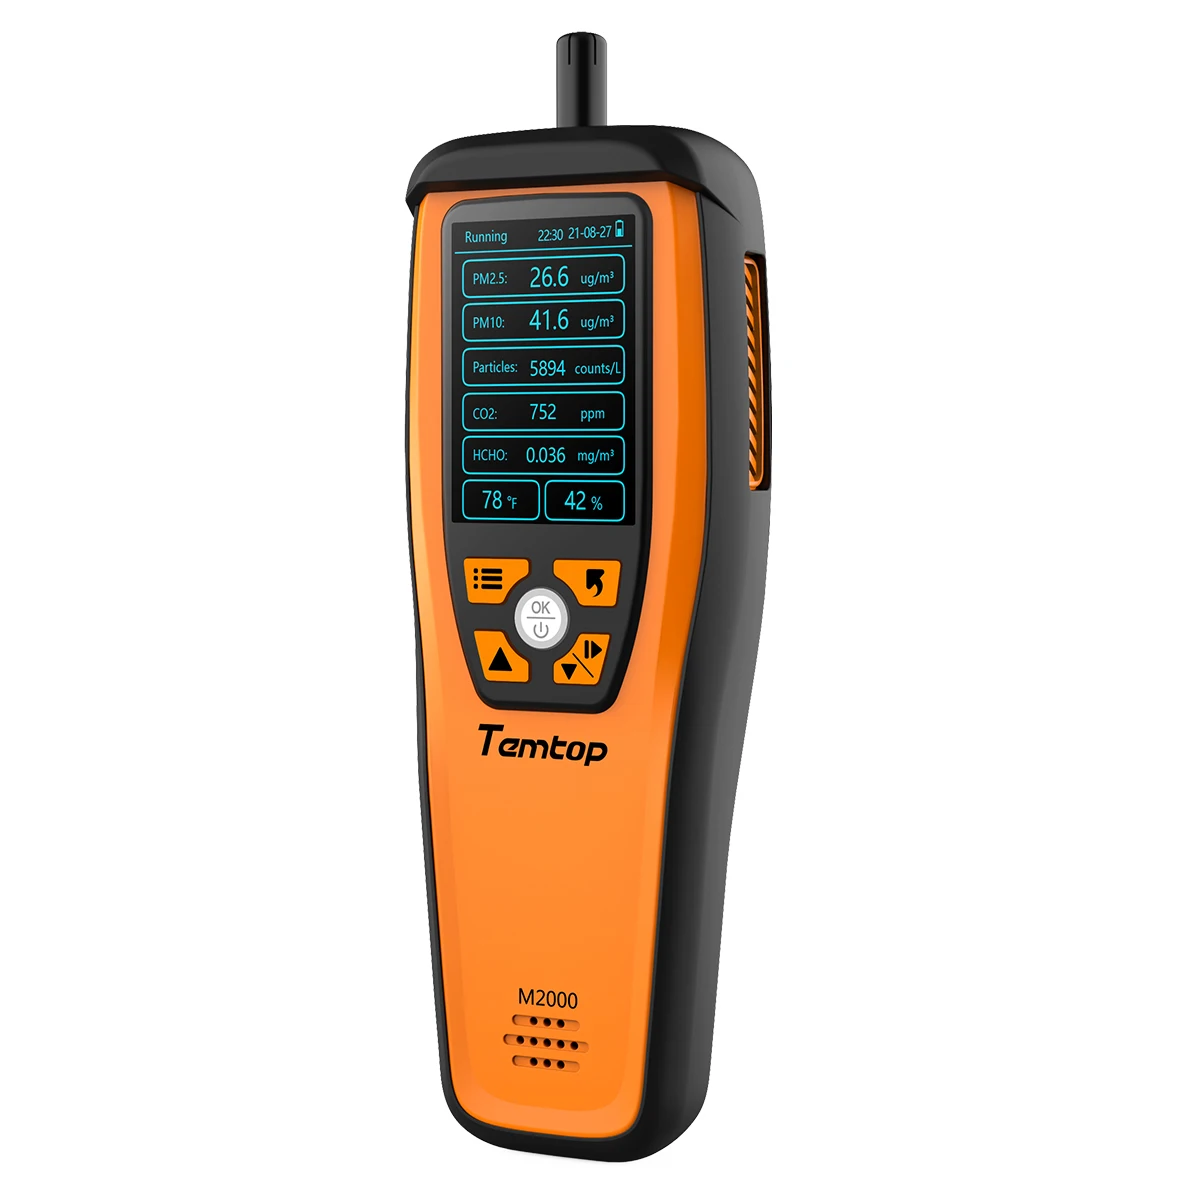 

Temtop M2000 2nd Generation CO2 Meter Air Quality Monitor Air Analyzer PM2.5 PM10 HCHO Temp Humidity Data Export